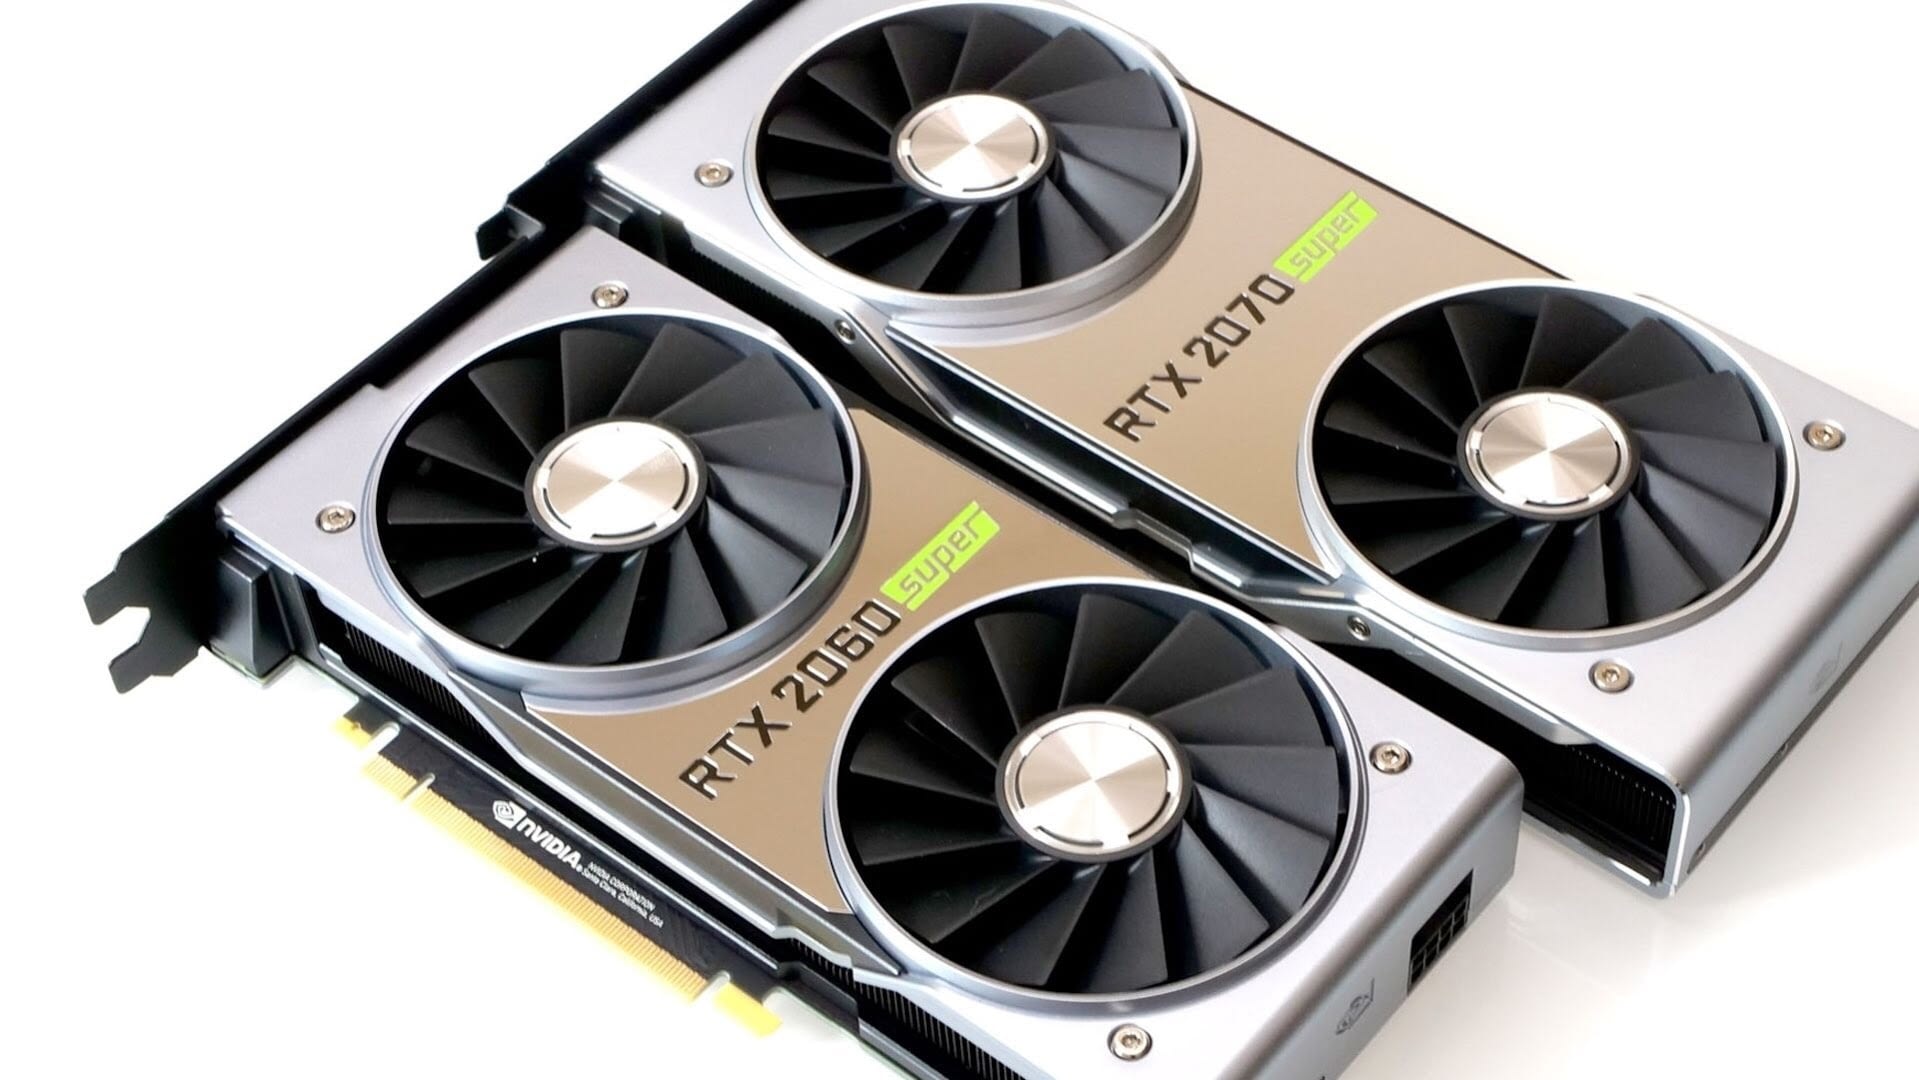 Here's what nvidia is doing to combat it. Nvidia reveals new line of 'Super' GeForce RTX graphics cards - IT Troubleshooters